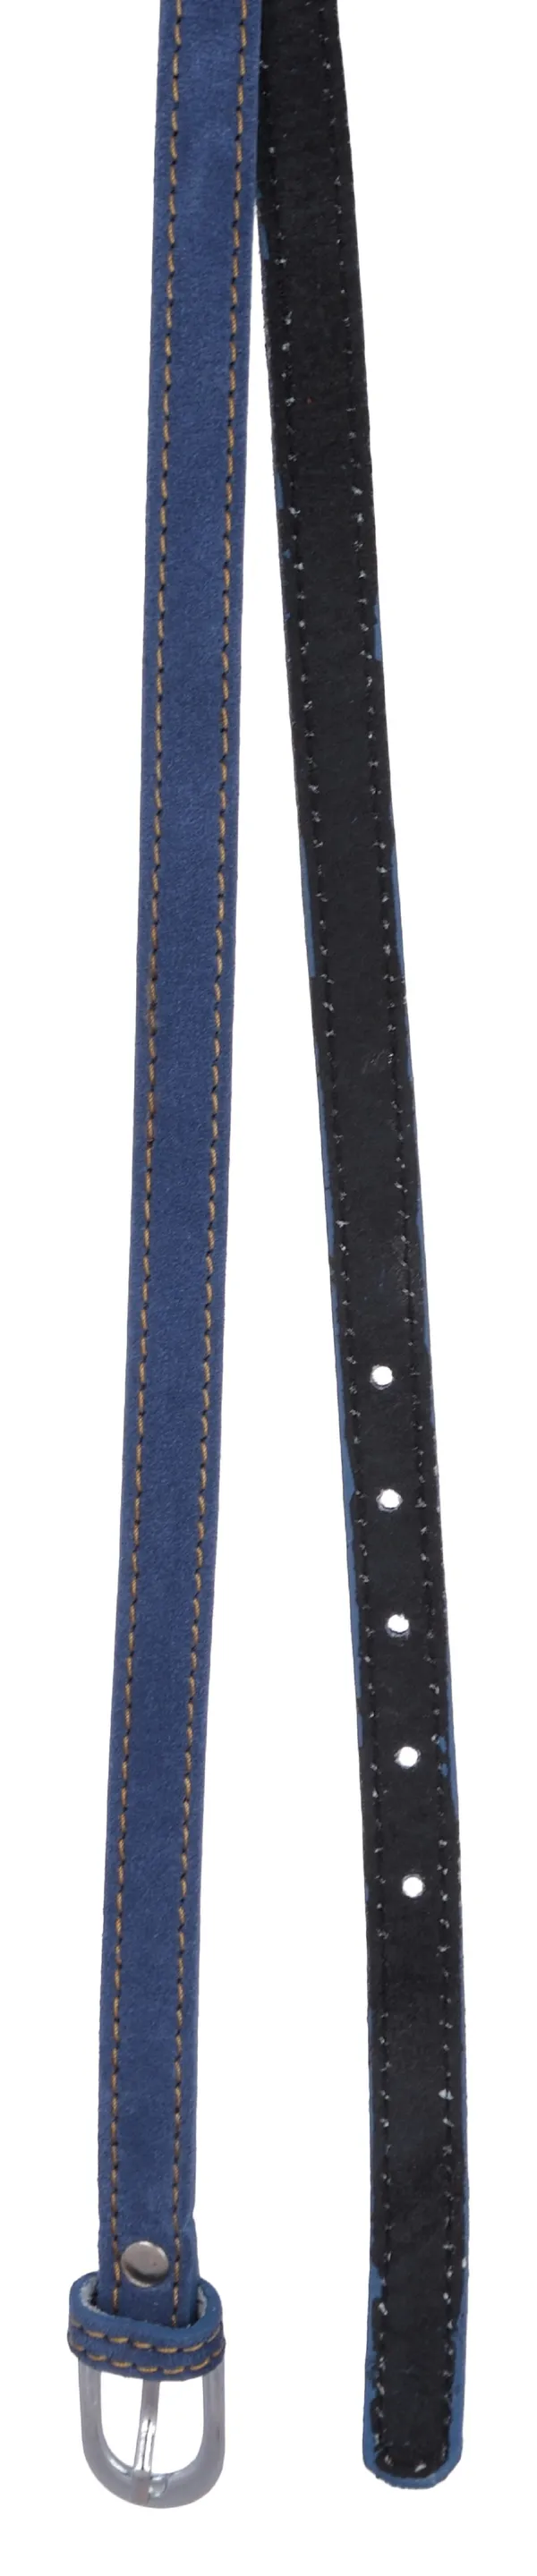 Exotique_Blue_Casual_Leather_Belt_For_Women_(BW0012BL)__Exotique